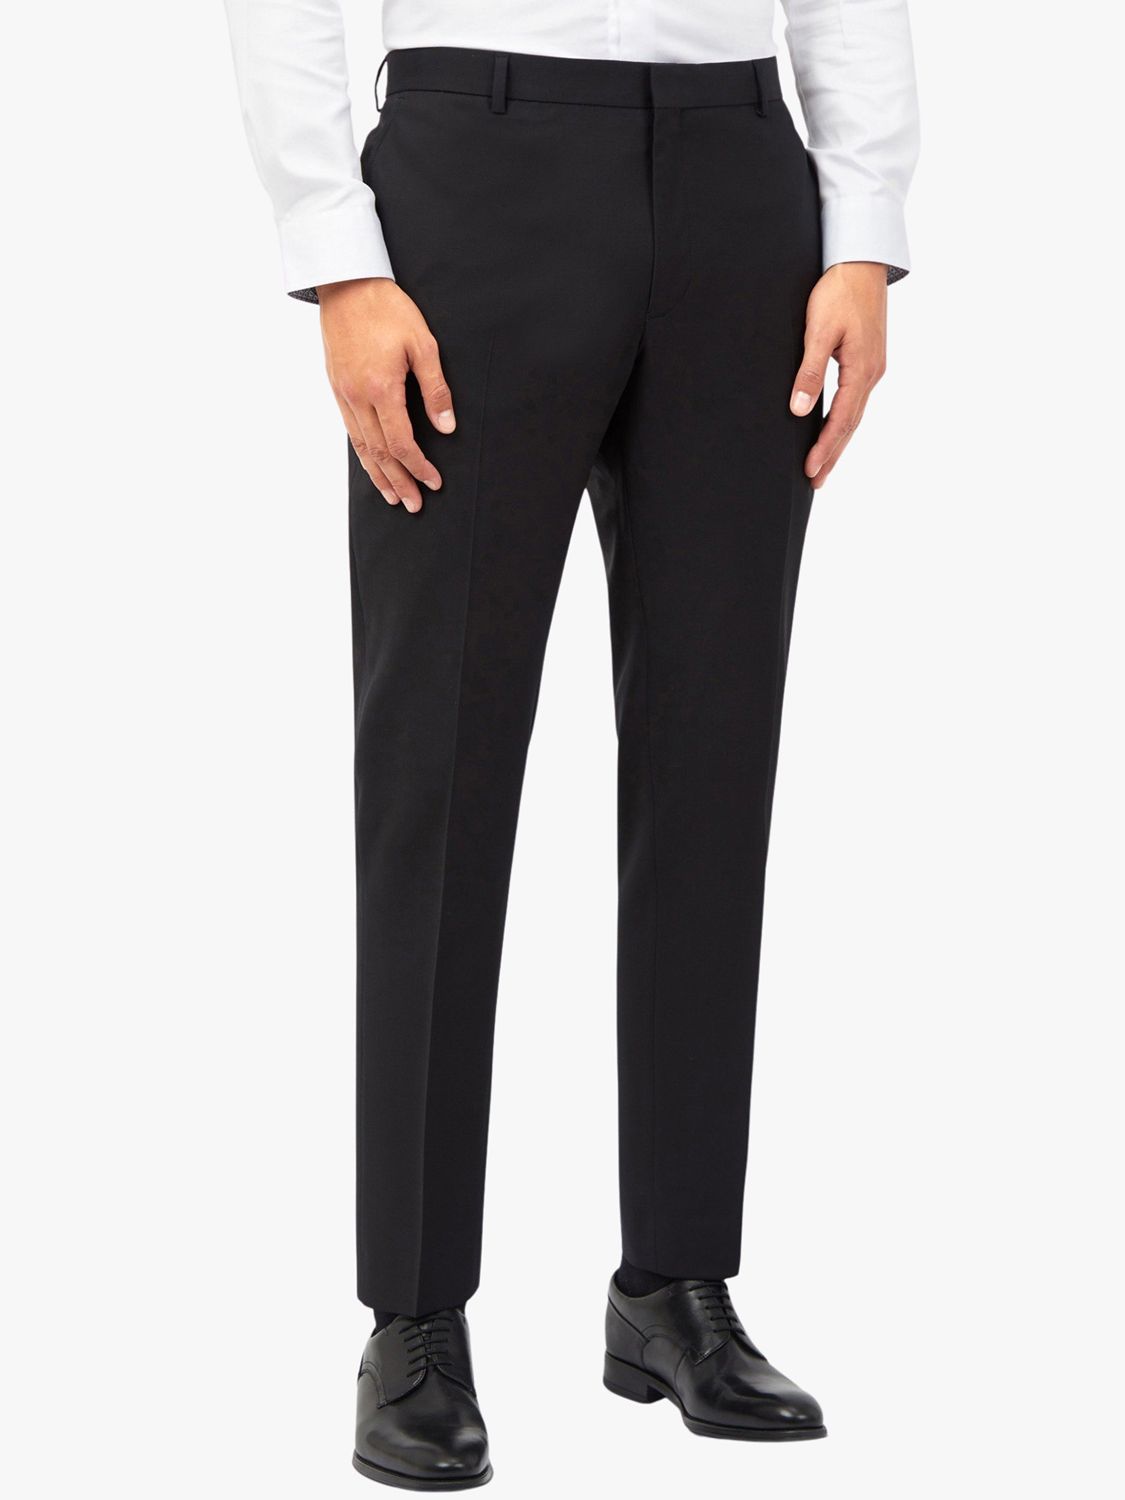 Ted Baker Tailored Fit Wool Blend Suit Trousers, Black at John Lewis ...